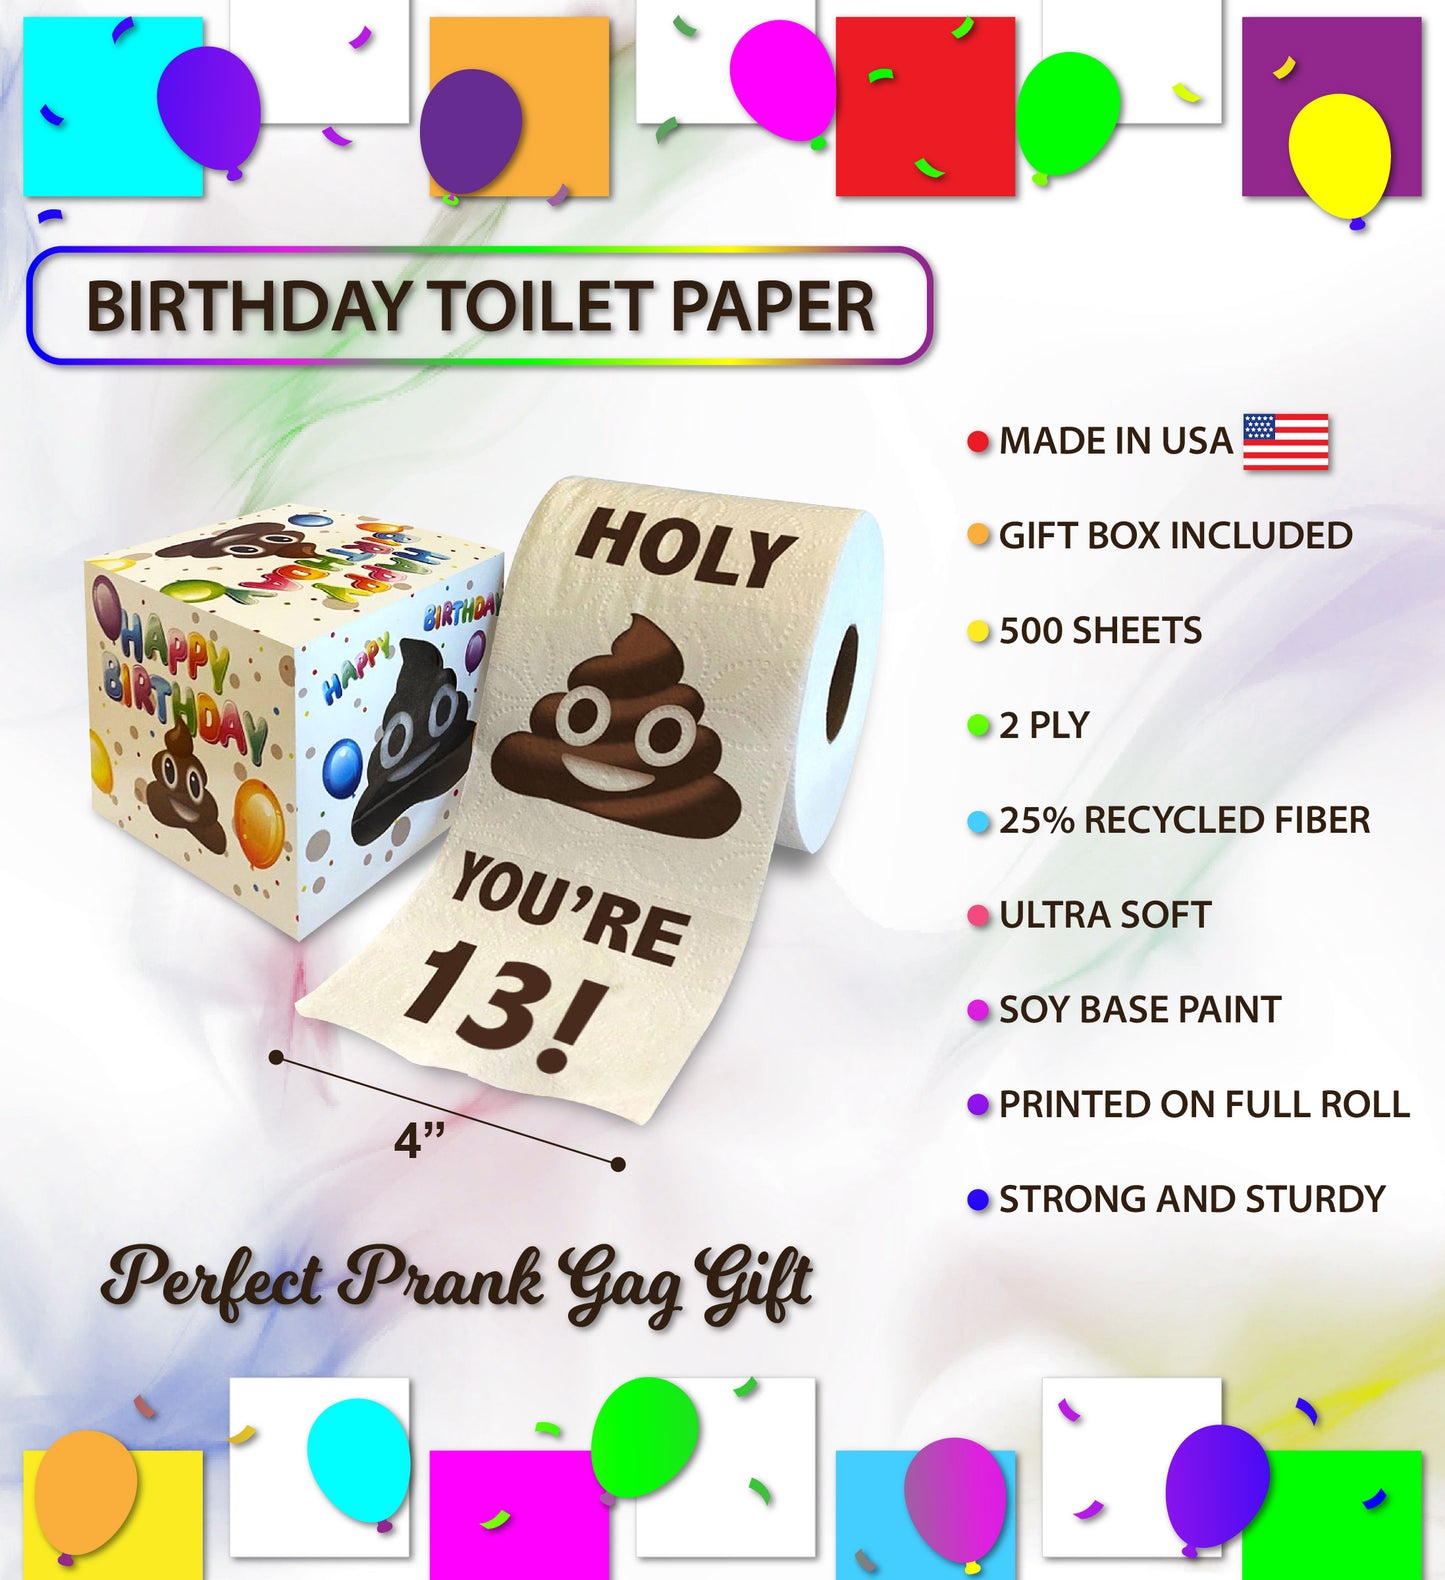 Printed TP Holy Poop You're 13 Printed Toilet Paper Funny Gag Gift – 500 Sheets